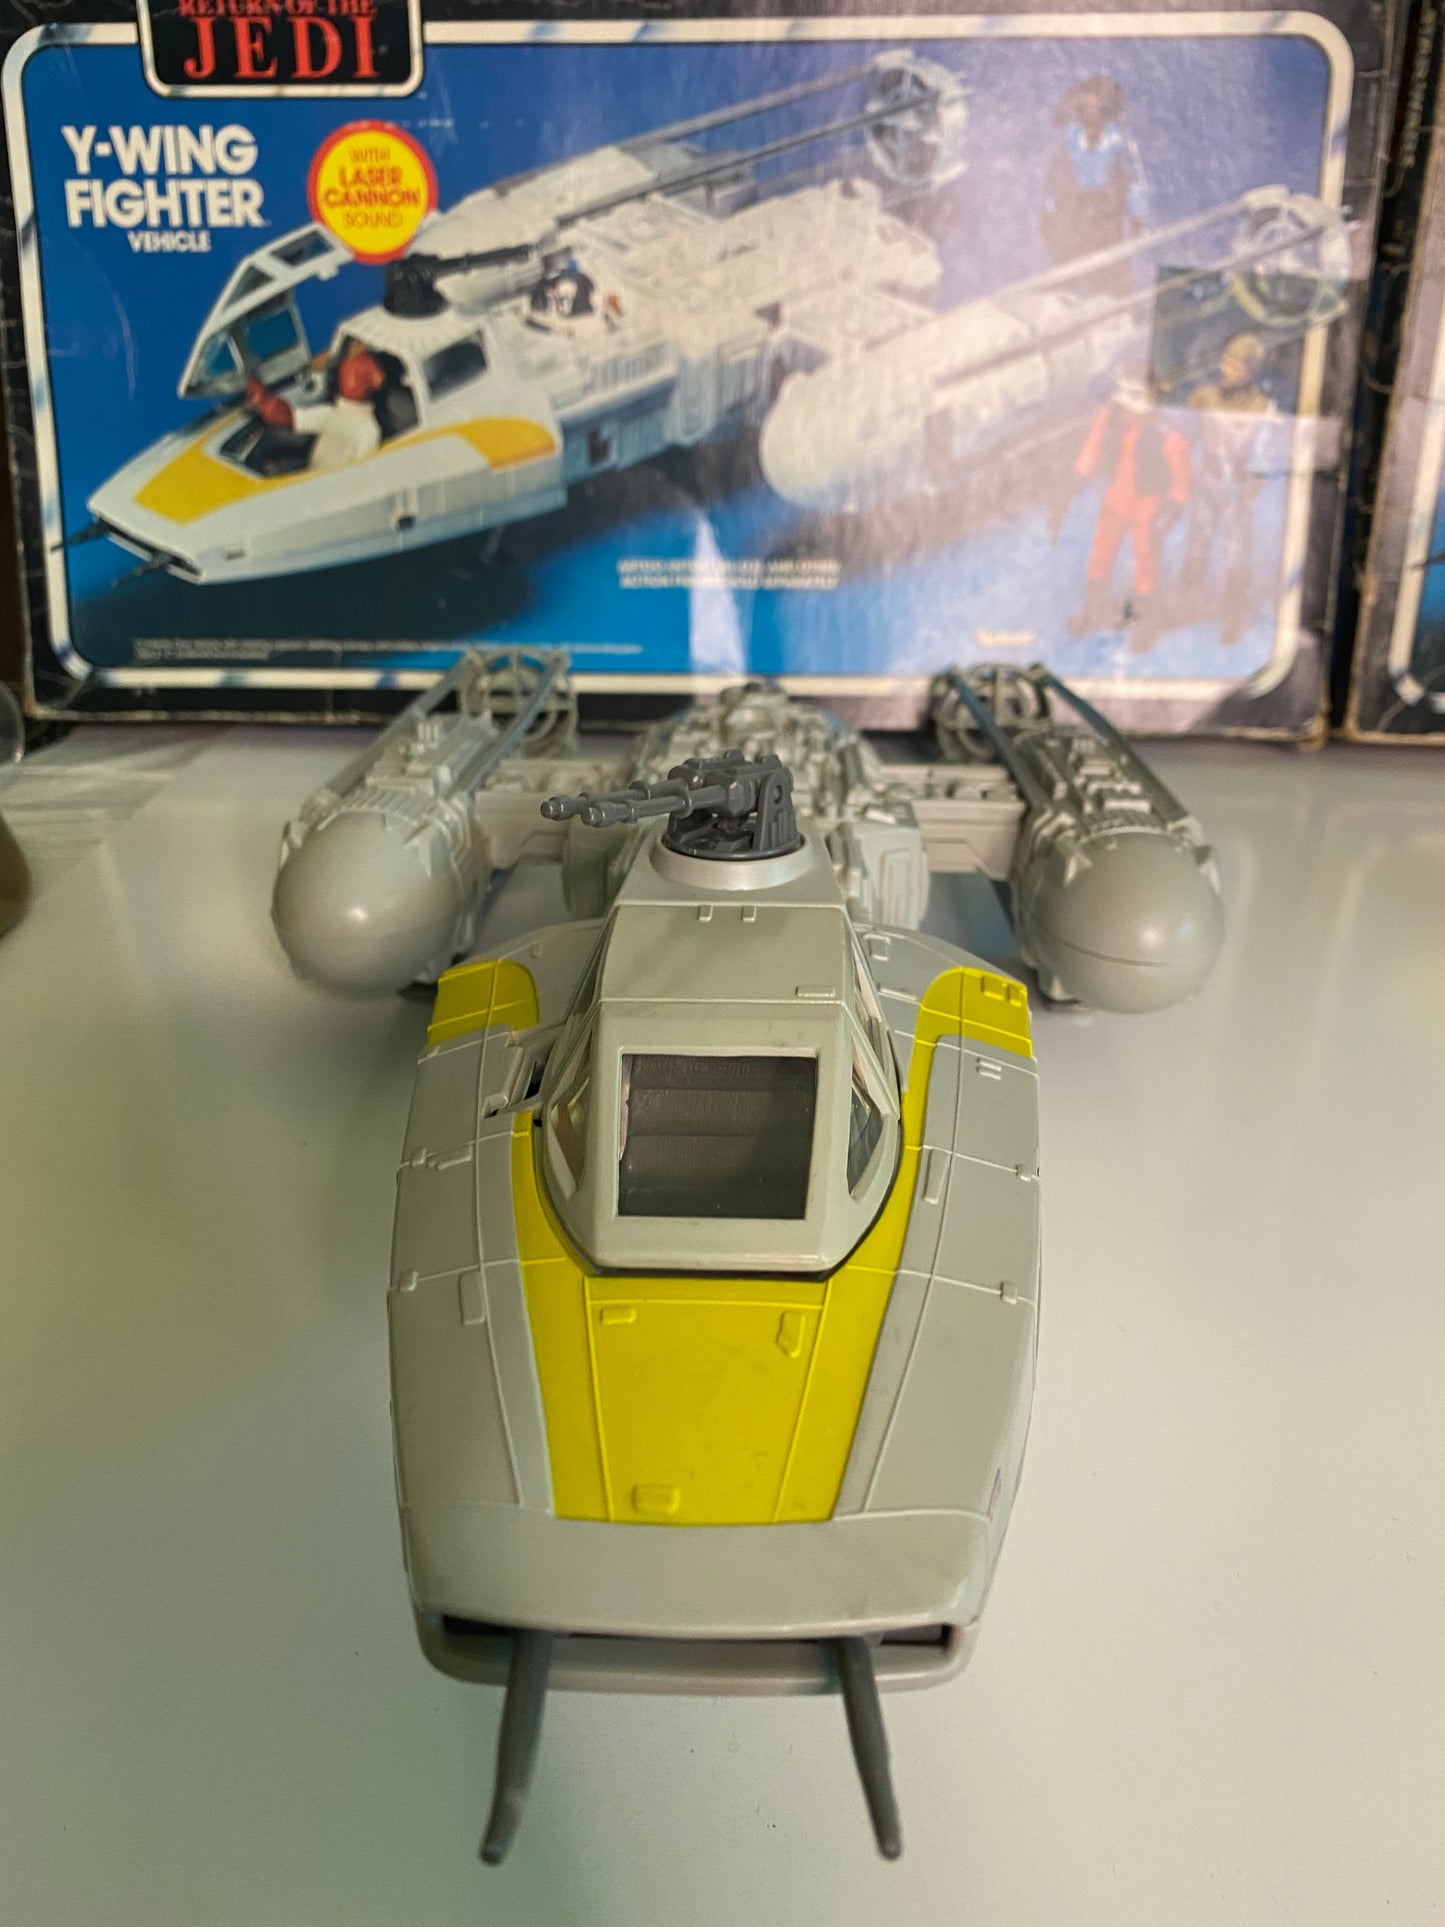 Y-Wing Fighter- Kenner -missing bomb